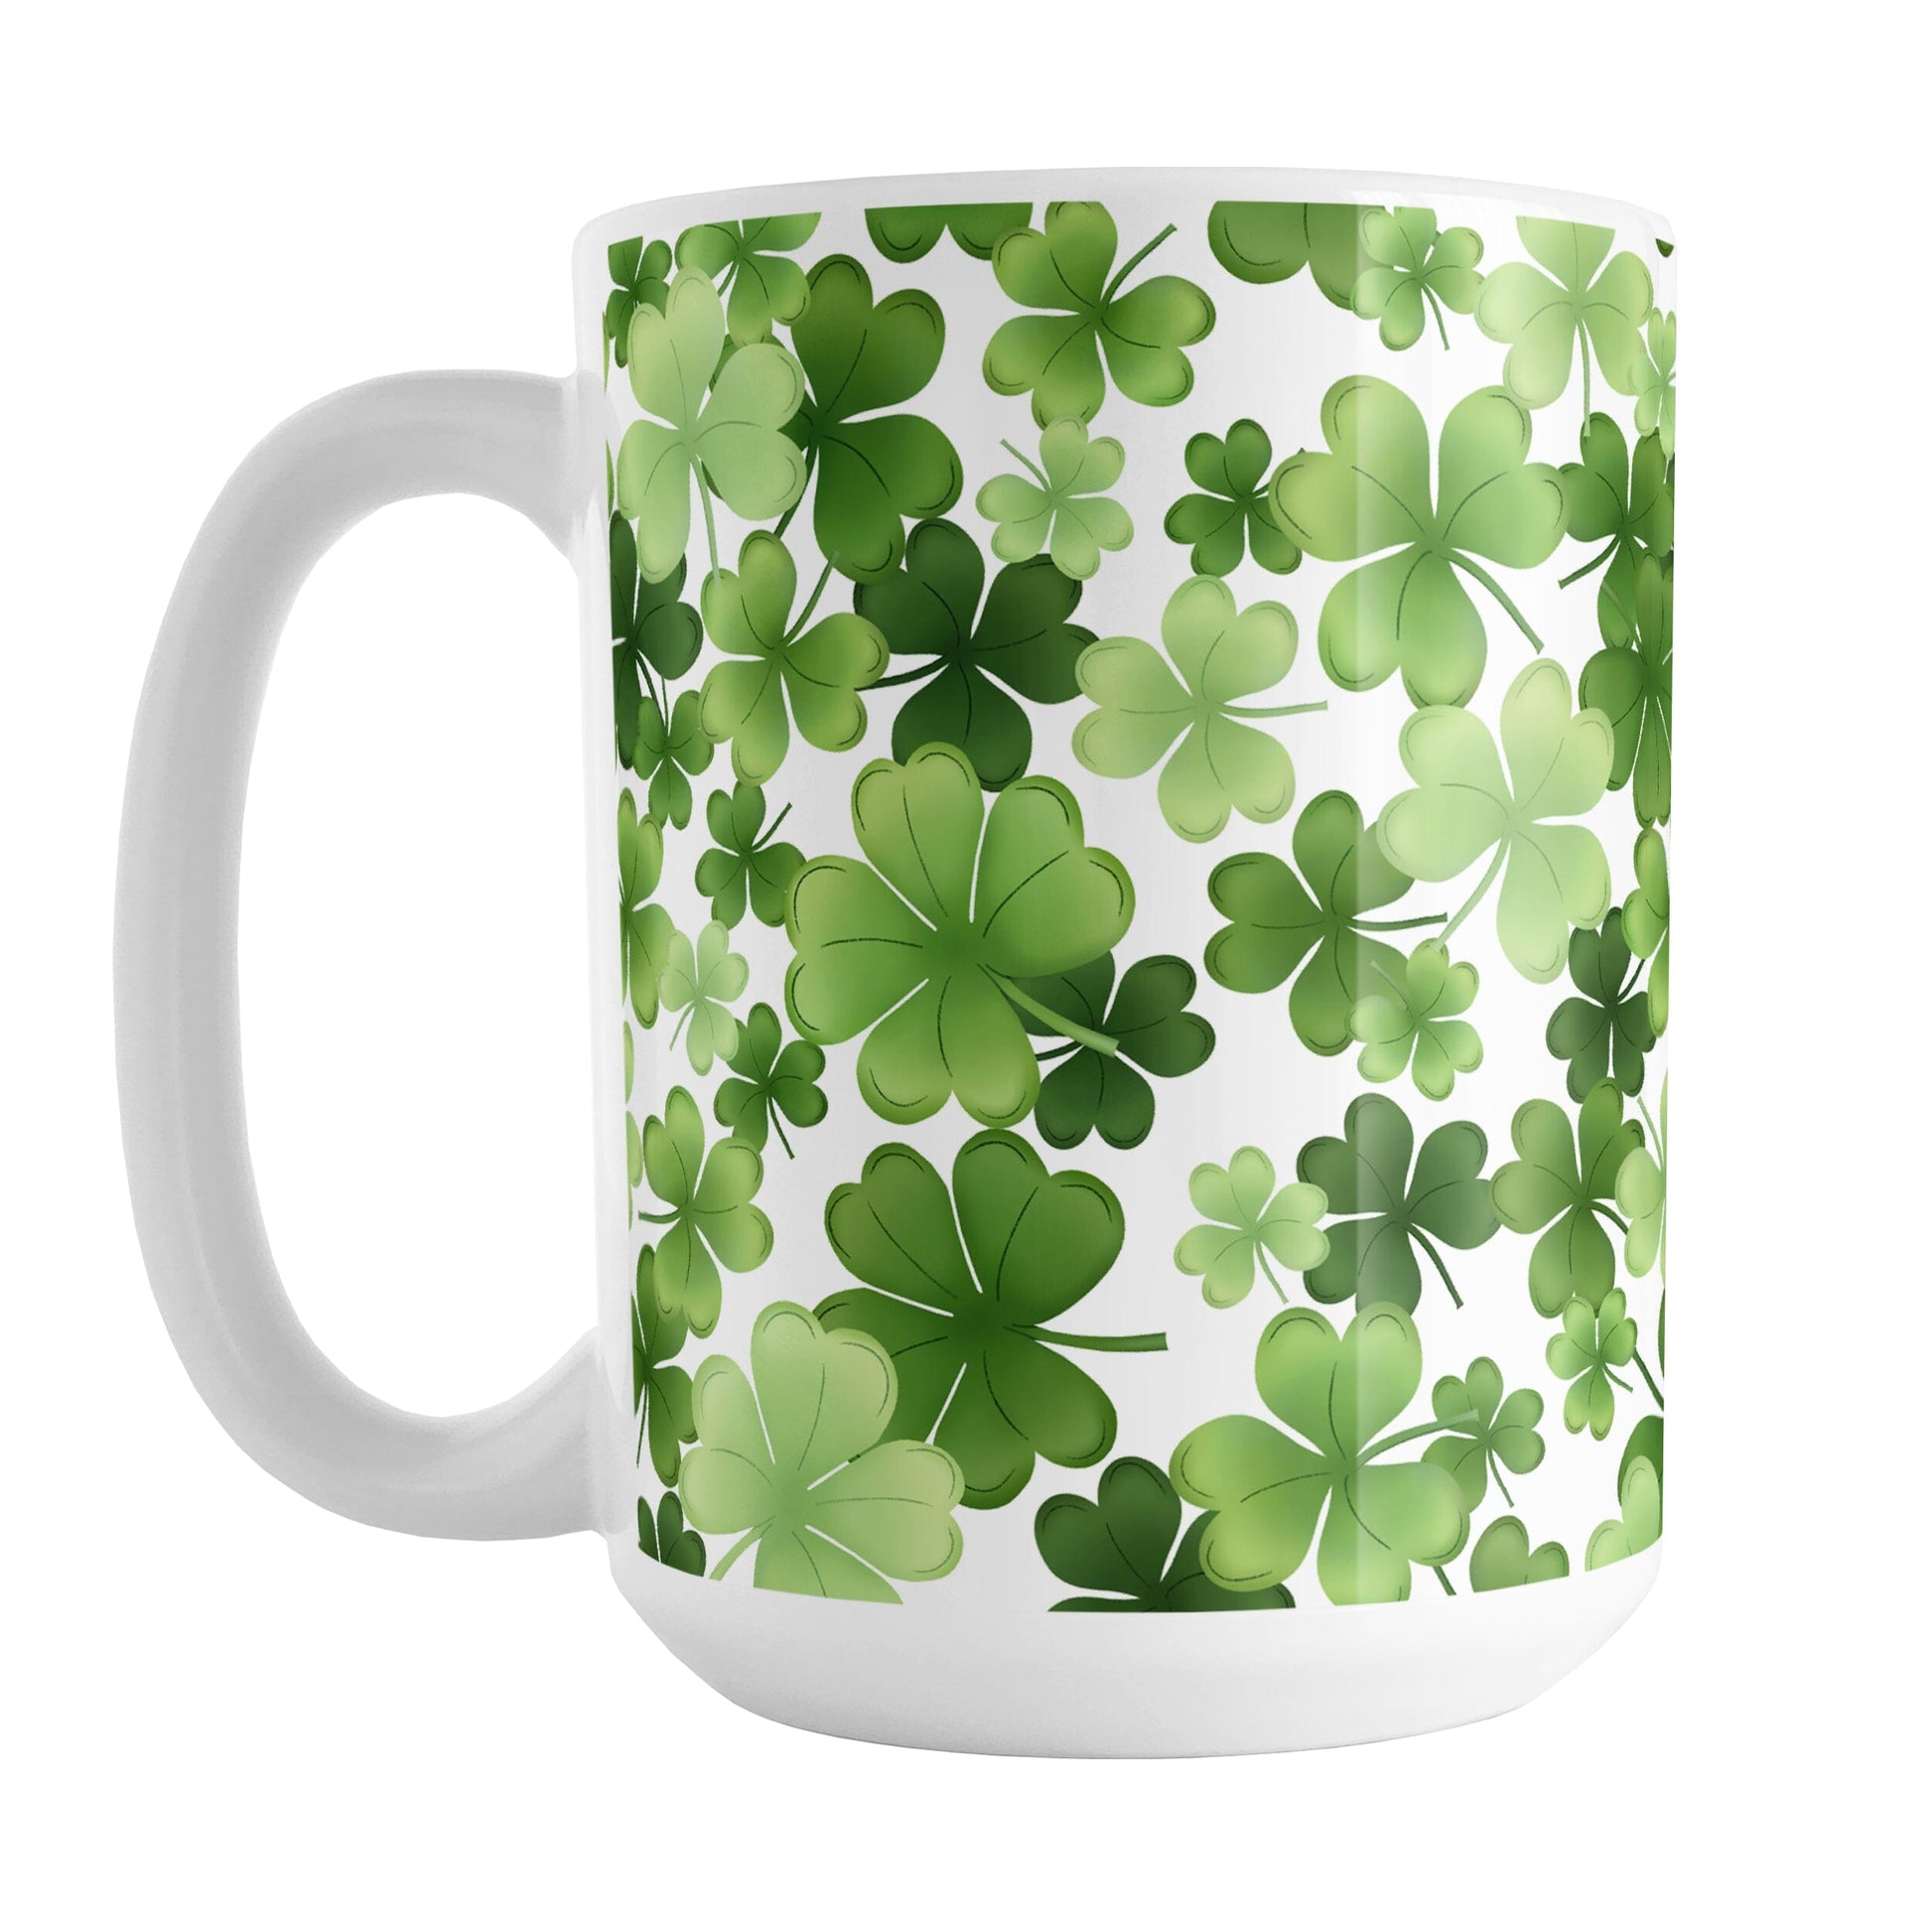 Shamrocks and 4-Leaf Clovers Mug (15oz) at Amy's Coffee Mugs. A ceramic coffee mug designed with an organic-like pattern of green shamrocks and 4-leaf clovers in different shades of green. This illustrated pattern is printed around the mug to the handle. It's perfect for anyone who loves clovers and shamrocks or wants a new mug for St. Patrick's Day.